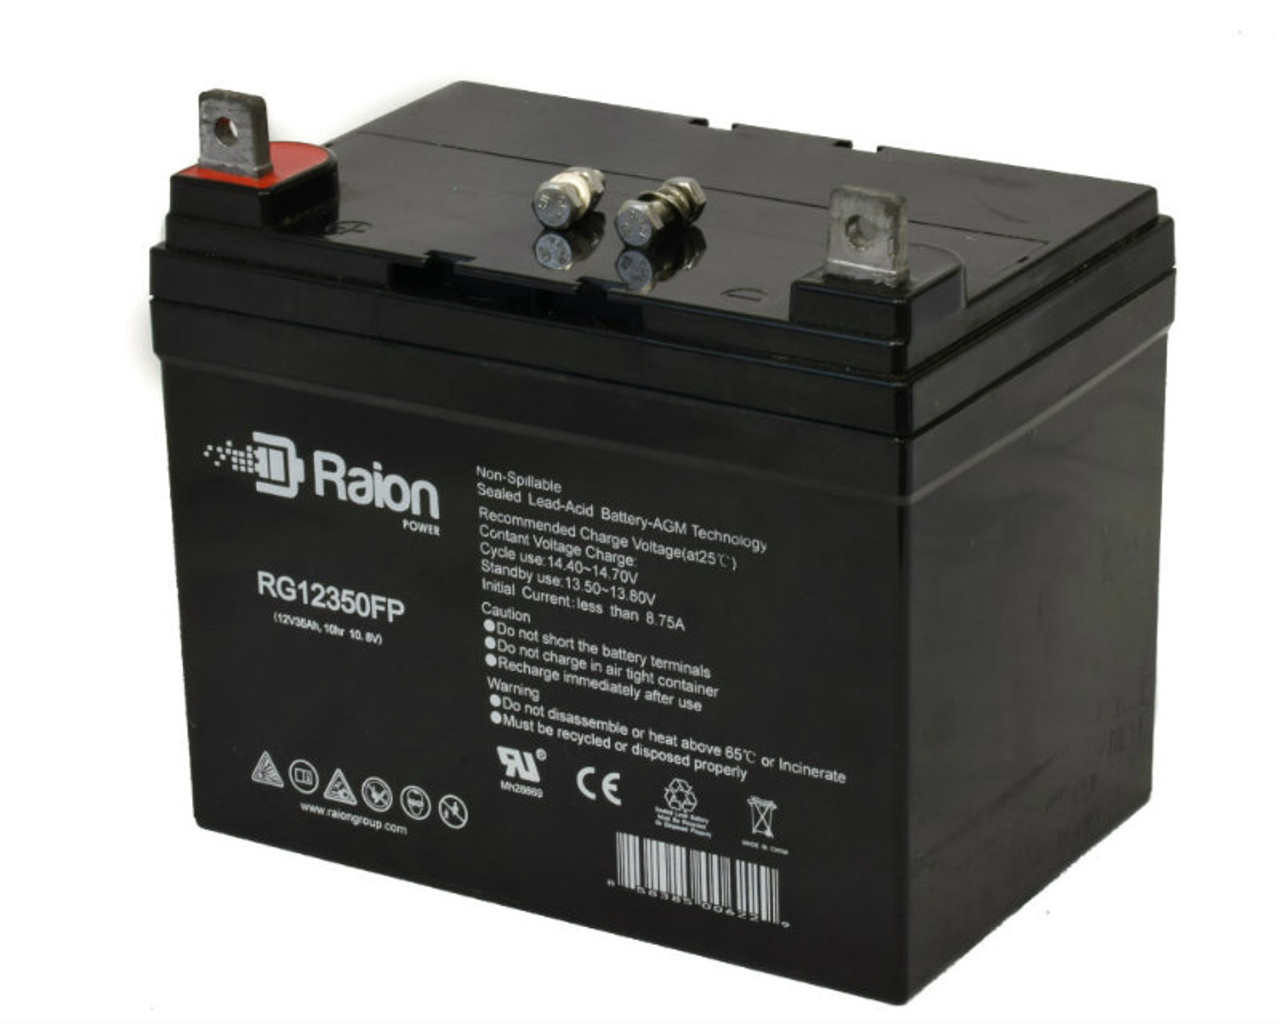 Raion Power Replacement 12V 35Ah RG12350FP Battery for Bolens by Textron 3000 SERIES